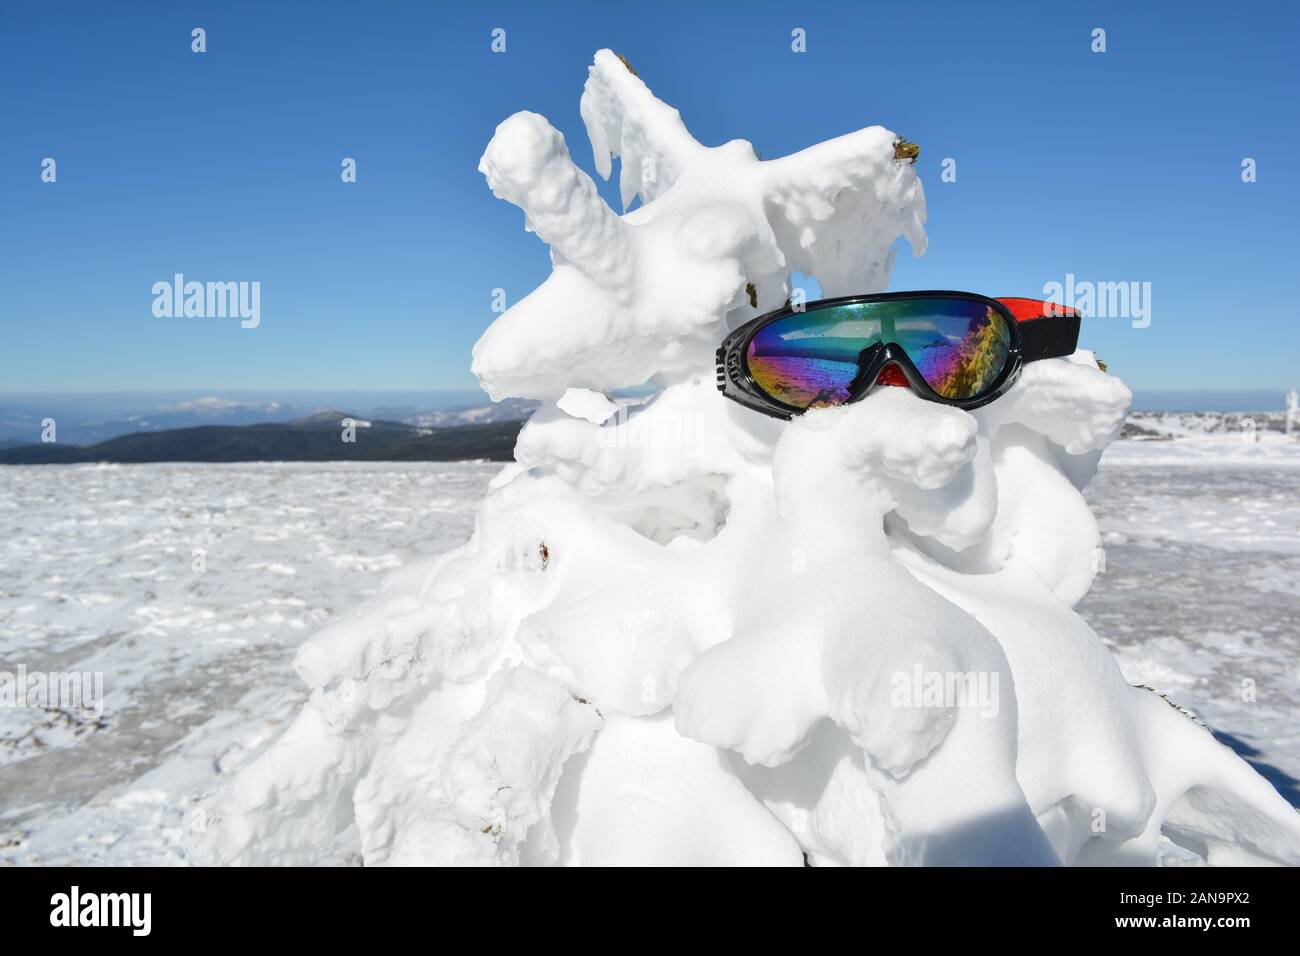 Goggles forgotten on fir covered by snow, close up view, Mt. Kopaonik, Serbia Stock Photo